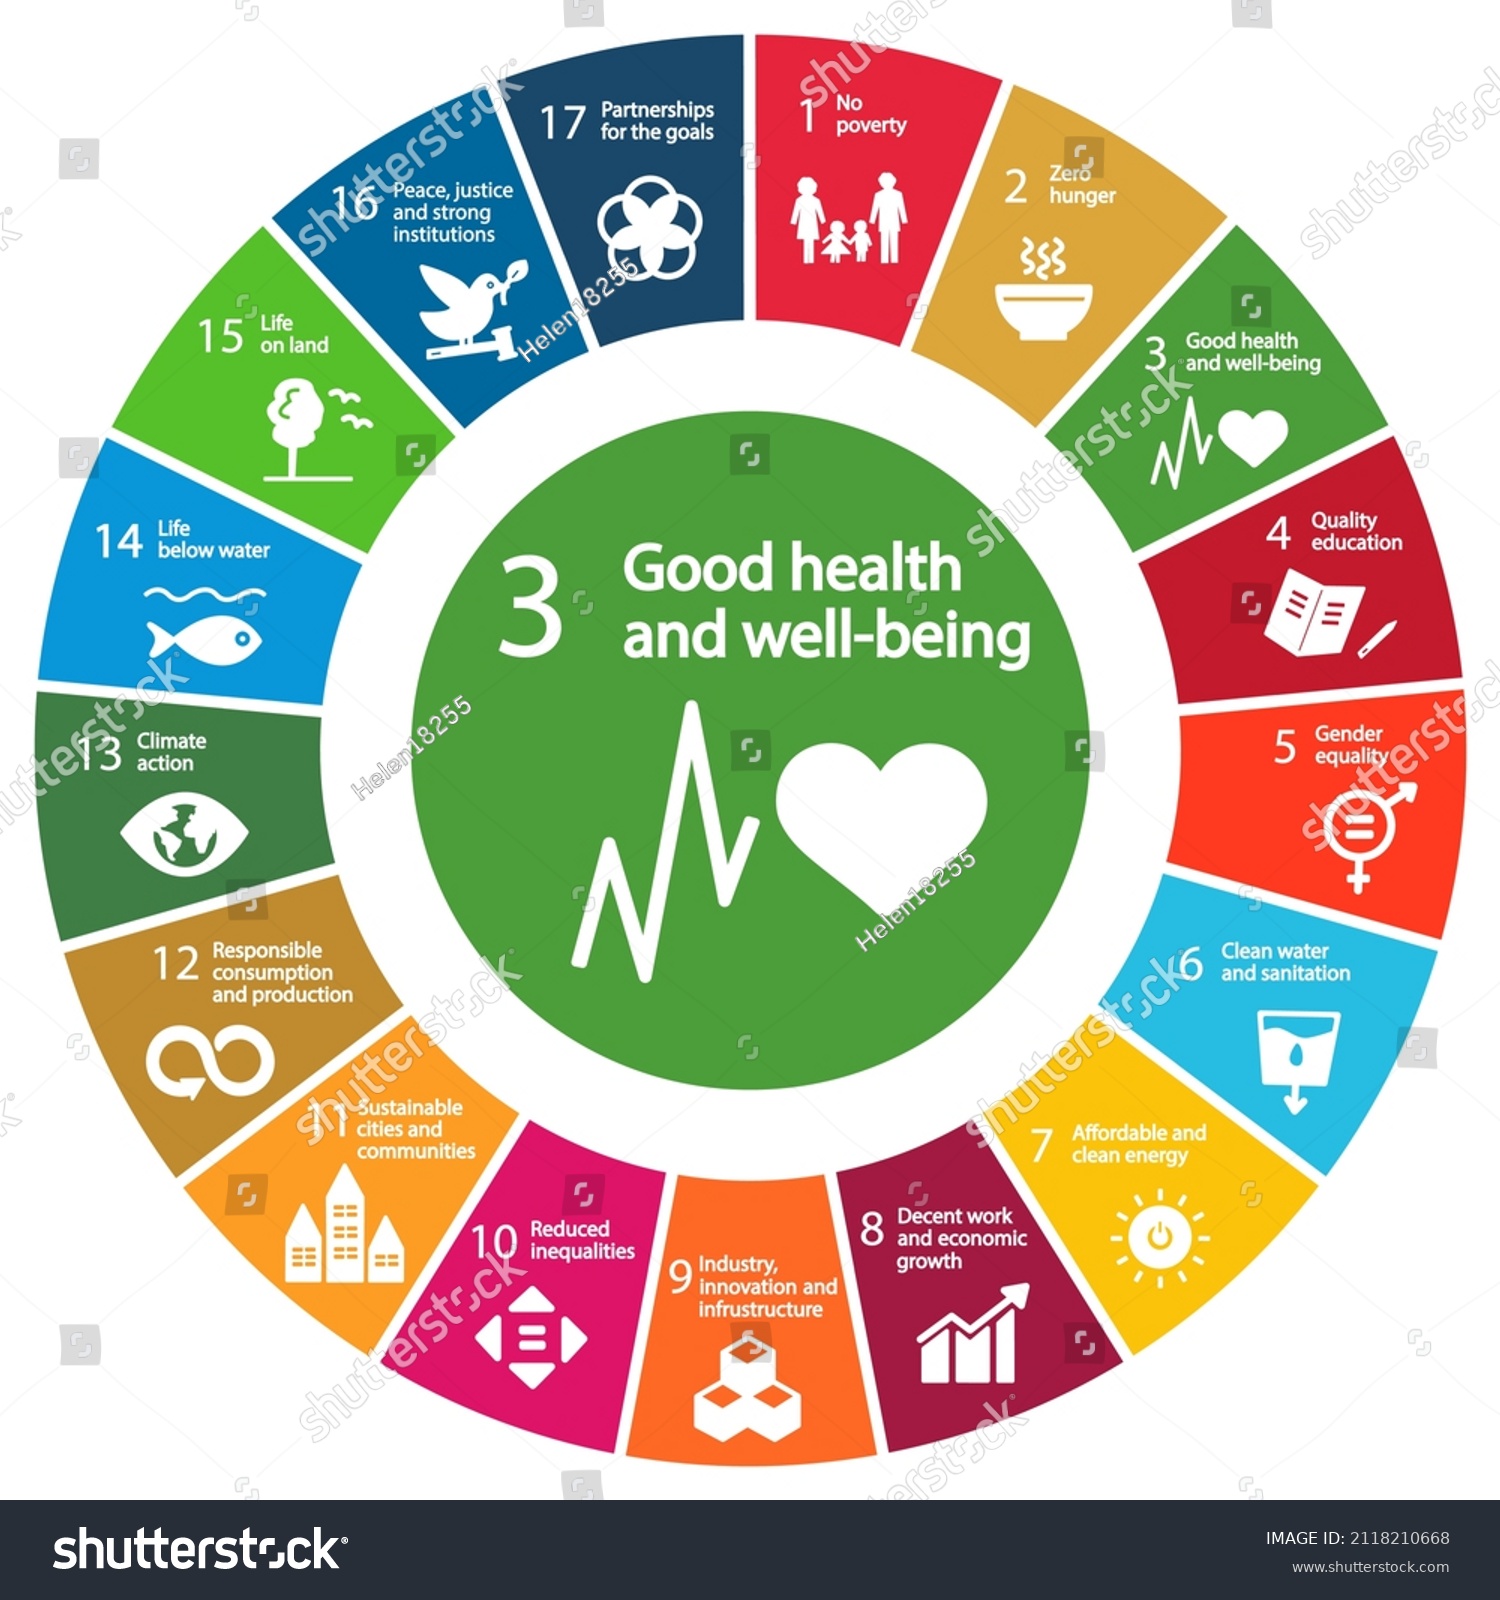 Good Health Wellbeing Icon Goal 3 Stock Vector (Royalty Free ...